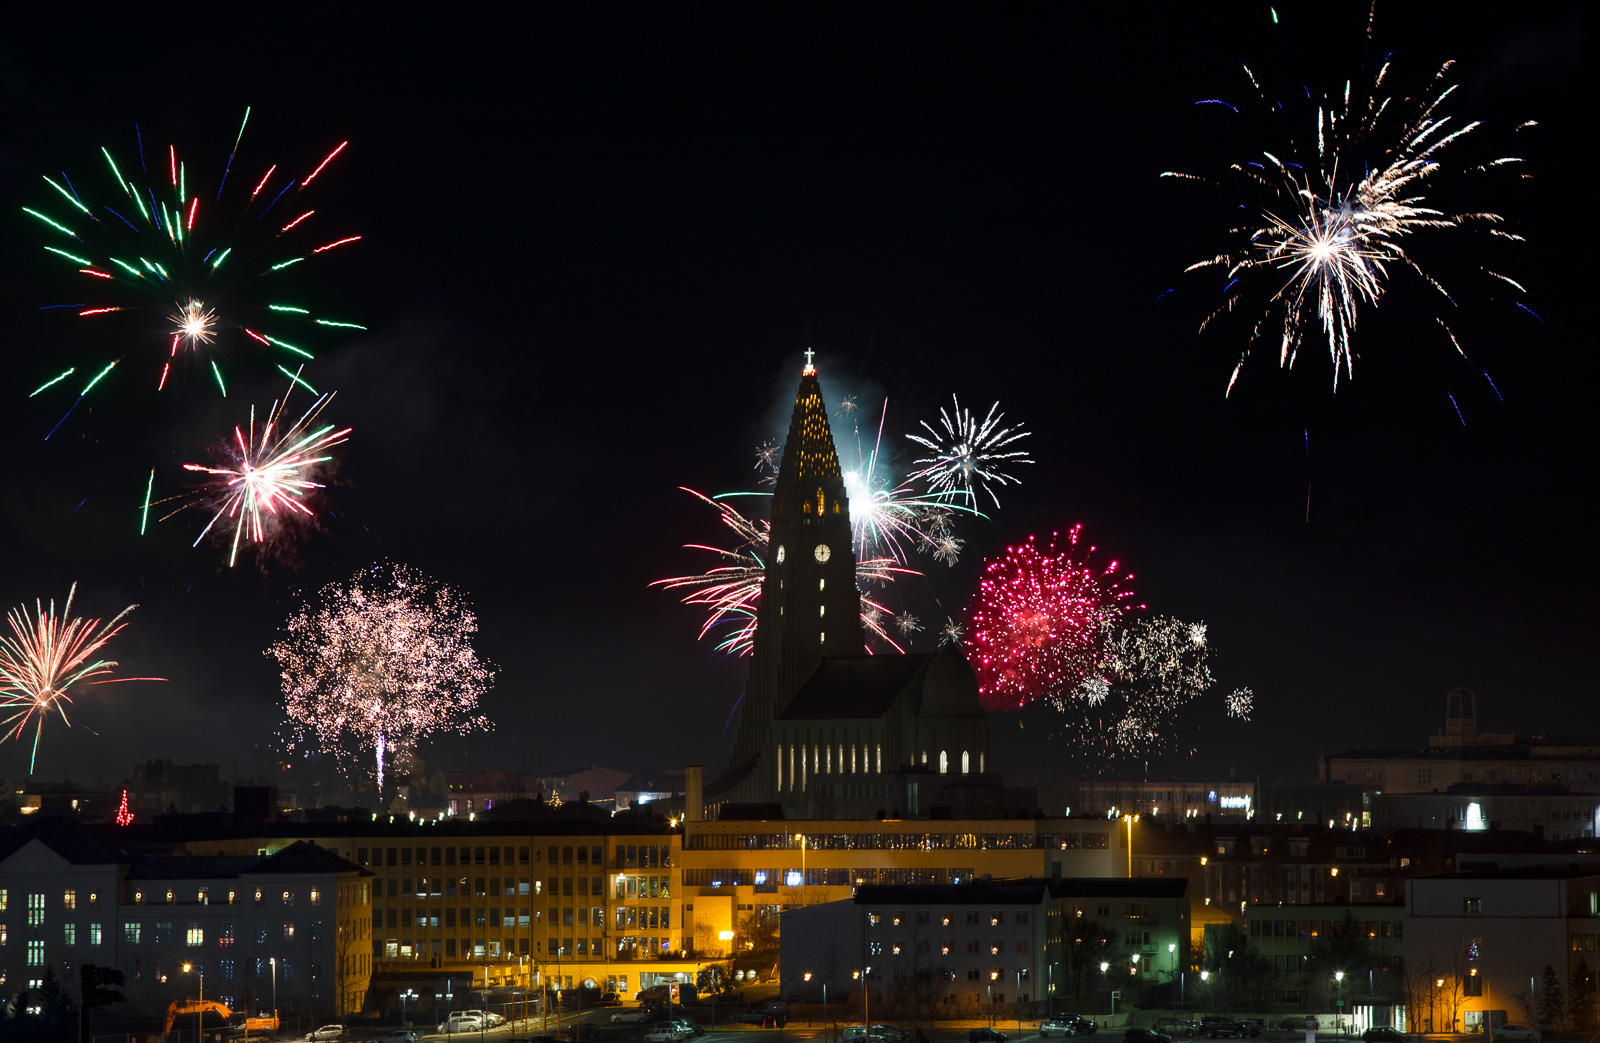 From Iceland – Sales period to reduce fireworks